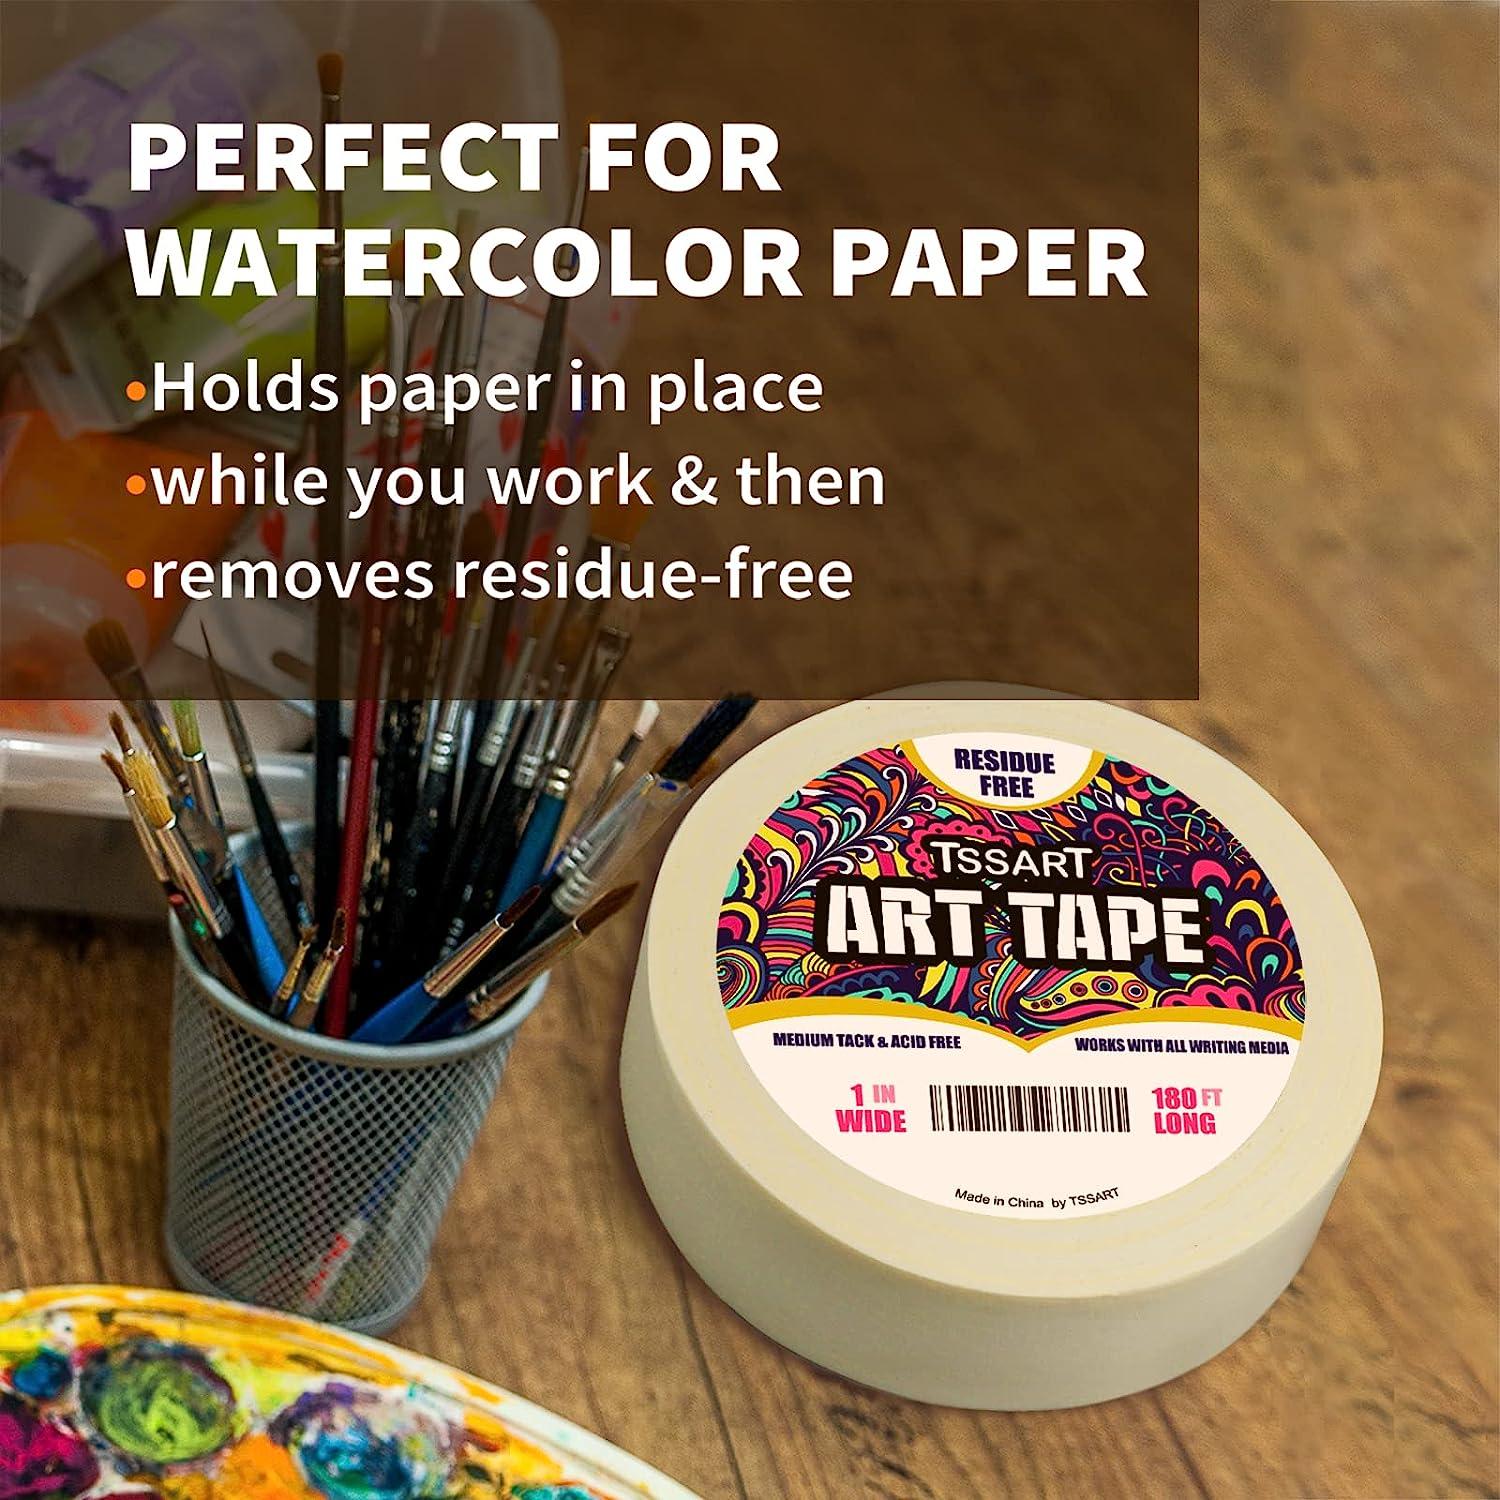 TSSART White Art Tape Medium Tack - Masking Artists Tape for Drafting Art Watercolor  Painting Canvas Framing - Acid Free 1inch Wide 180FT Long